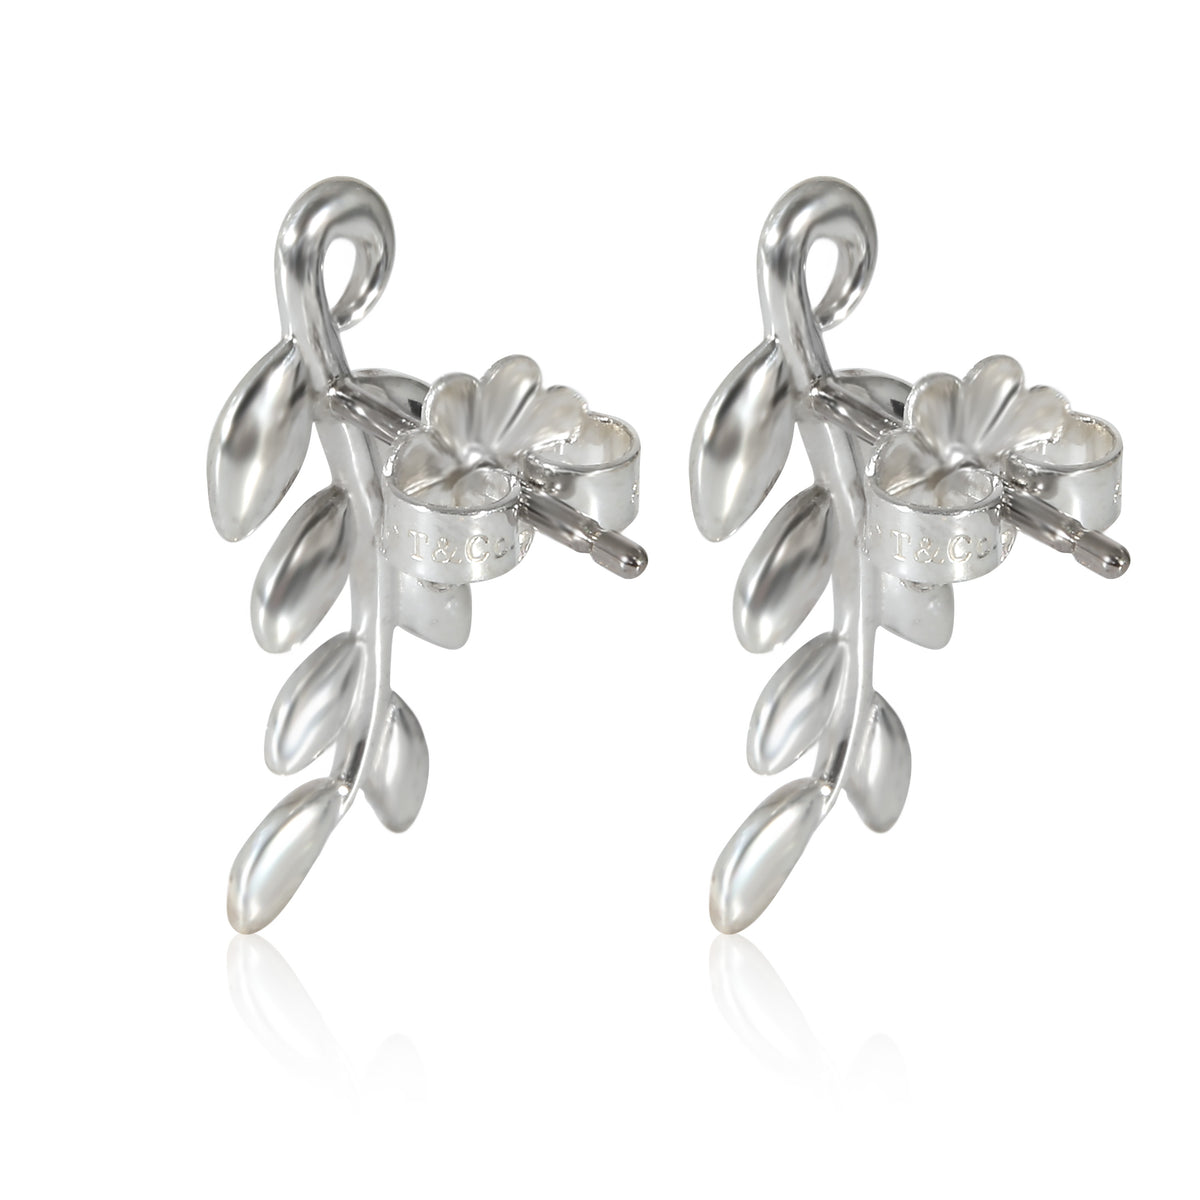 Tiffany & Co. Paloma Picasso Olive Leaf Climber Earrings in Sterling Silver